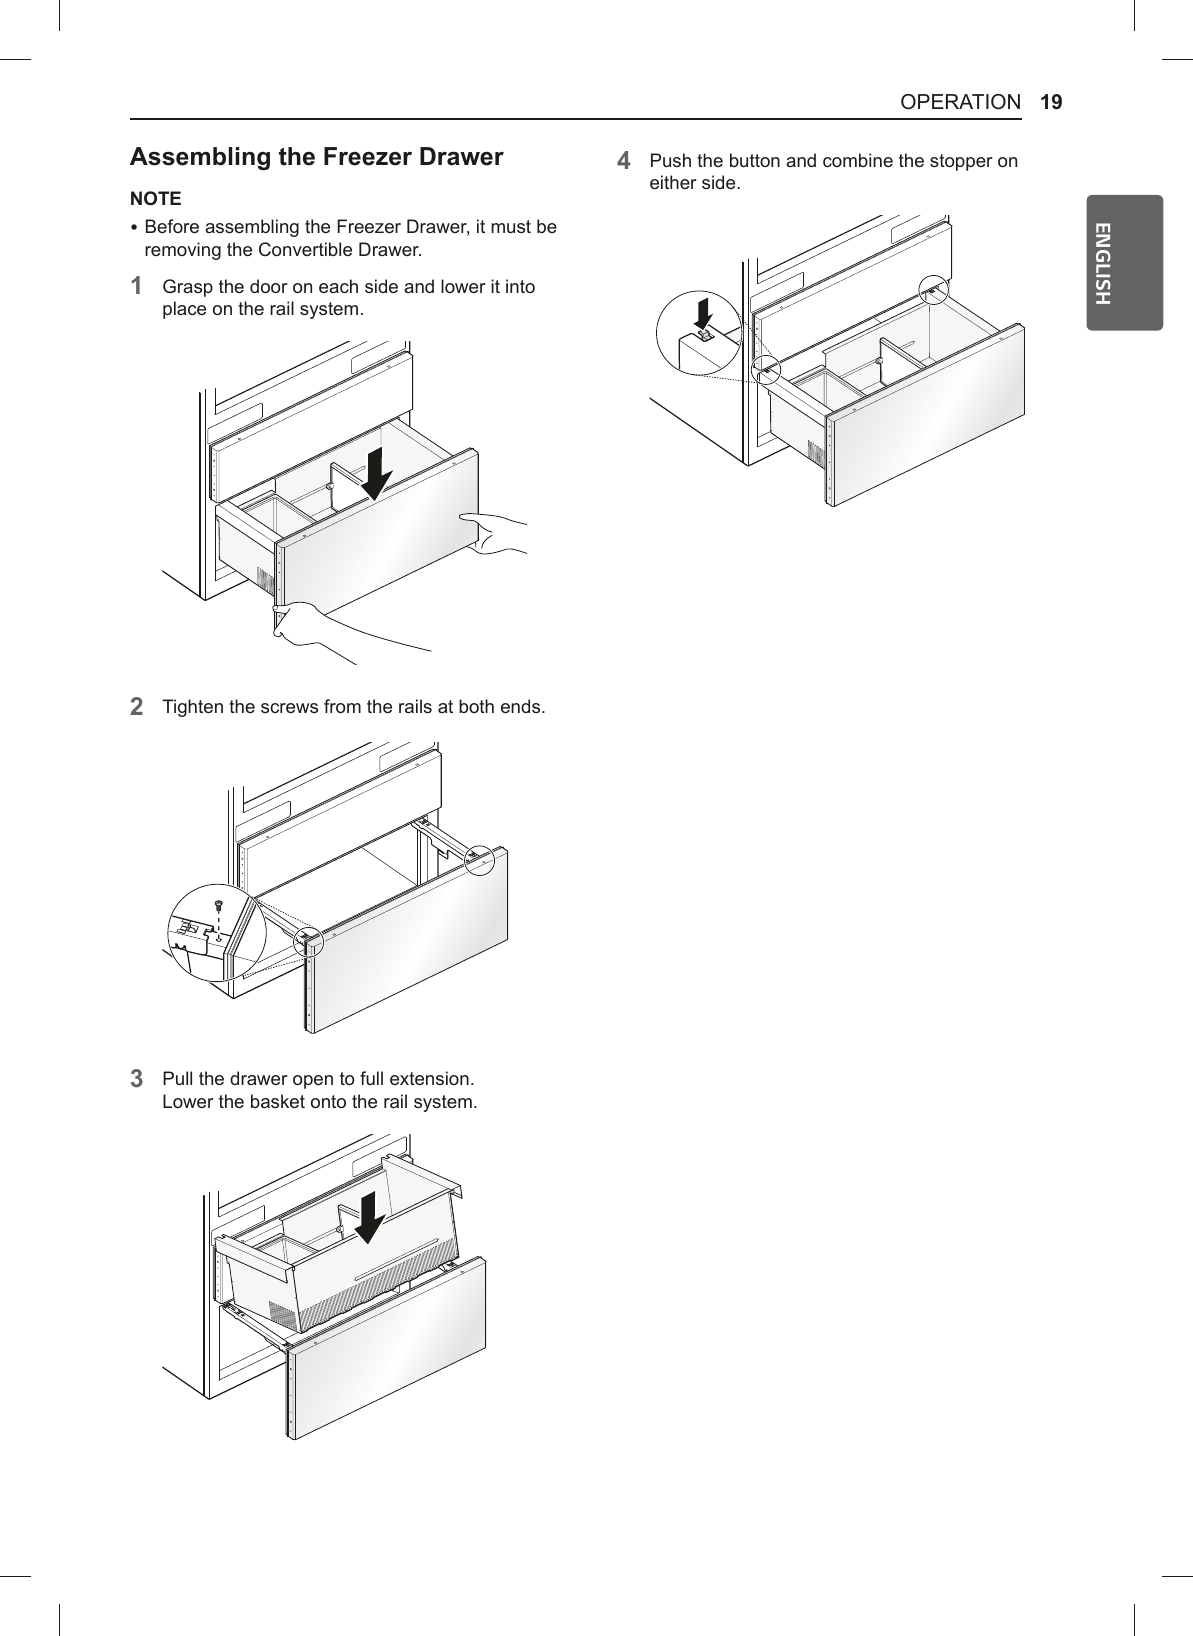 19OPERATIONENGLISH$VVHPEOLQJWKH)UHH]HU&apos;UDZHUNOTE %Before assembling the Freezer Drawer, it must be removing the Convertible Drawer. 1Grasp the door on each side and lower it into place on the rail system.2Tighten the screws from the rails at both ends. 3Pull the drawer open to full extension. Lower the basket onto the rail system.4Push the button and combine the stopper on either side.